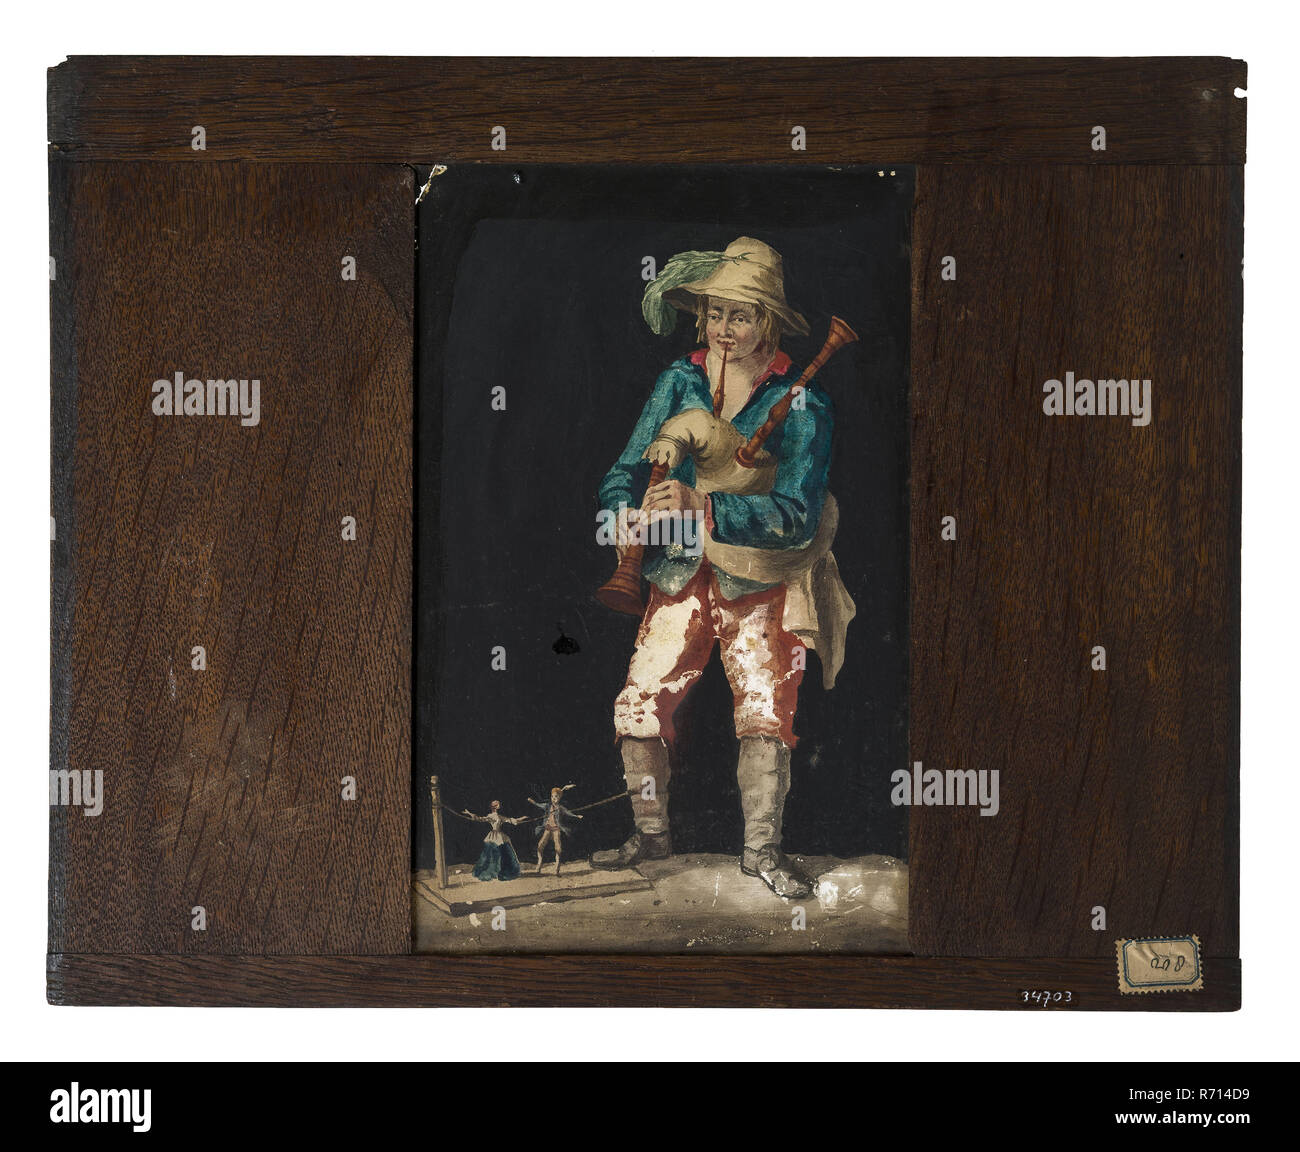 Hand-painted glass plate in wooden frame for illumination cabinet, image bagpipe player with dancing dolls, slideshelf slideshoot images glass paint wood oak leg, dimensions) handpainted Hand-painted glass for illumination cabinet in wide oak frame The frame is rejuvenated on the sides and shows wear and discolouration: the plates were pushed into an illumination cabinet from above. At the back left and right above two small legs fastening points for the illumination cabinet. Image of bagpipe player with his right leg making two puppets dance on string optics folk life Stock Photo